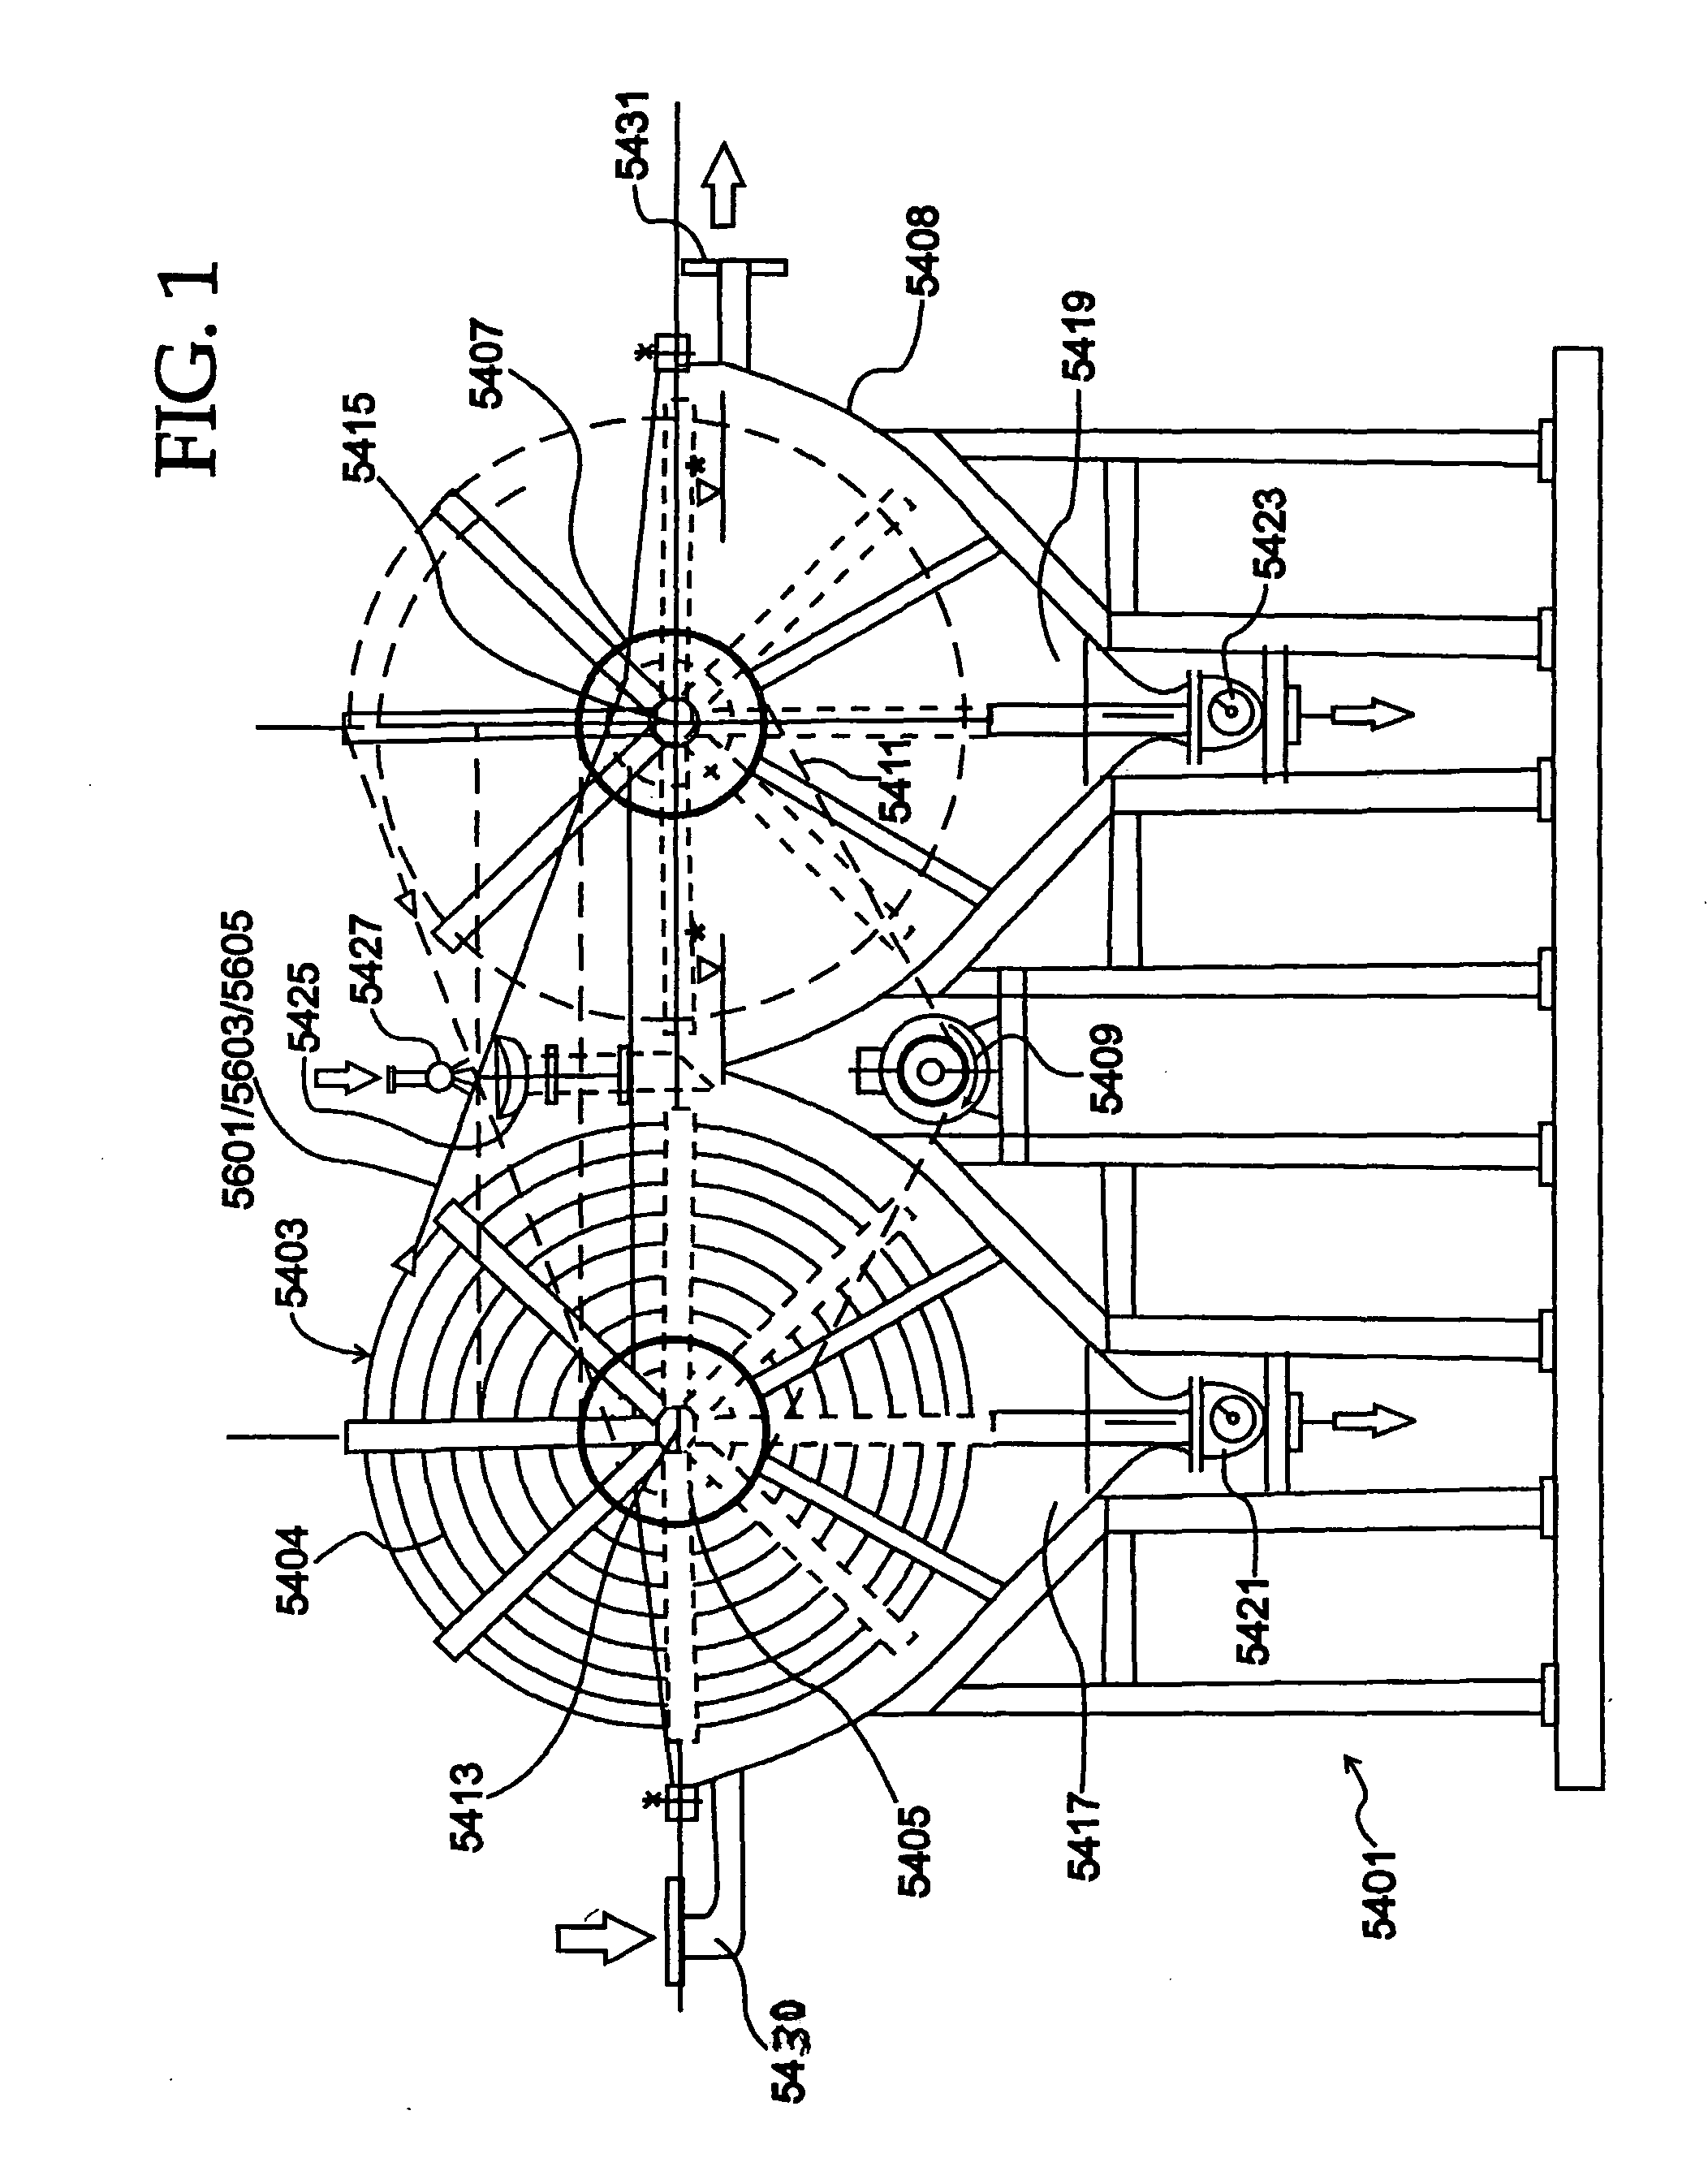 Biological wastewater treatment apparatus and methods using moving belt contractor